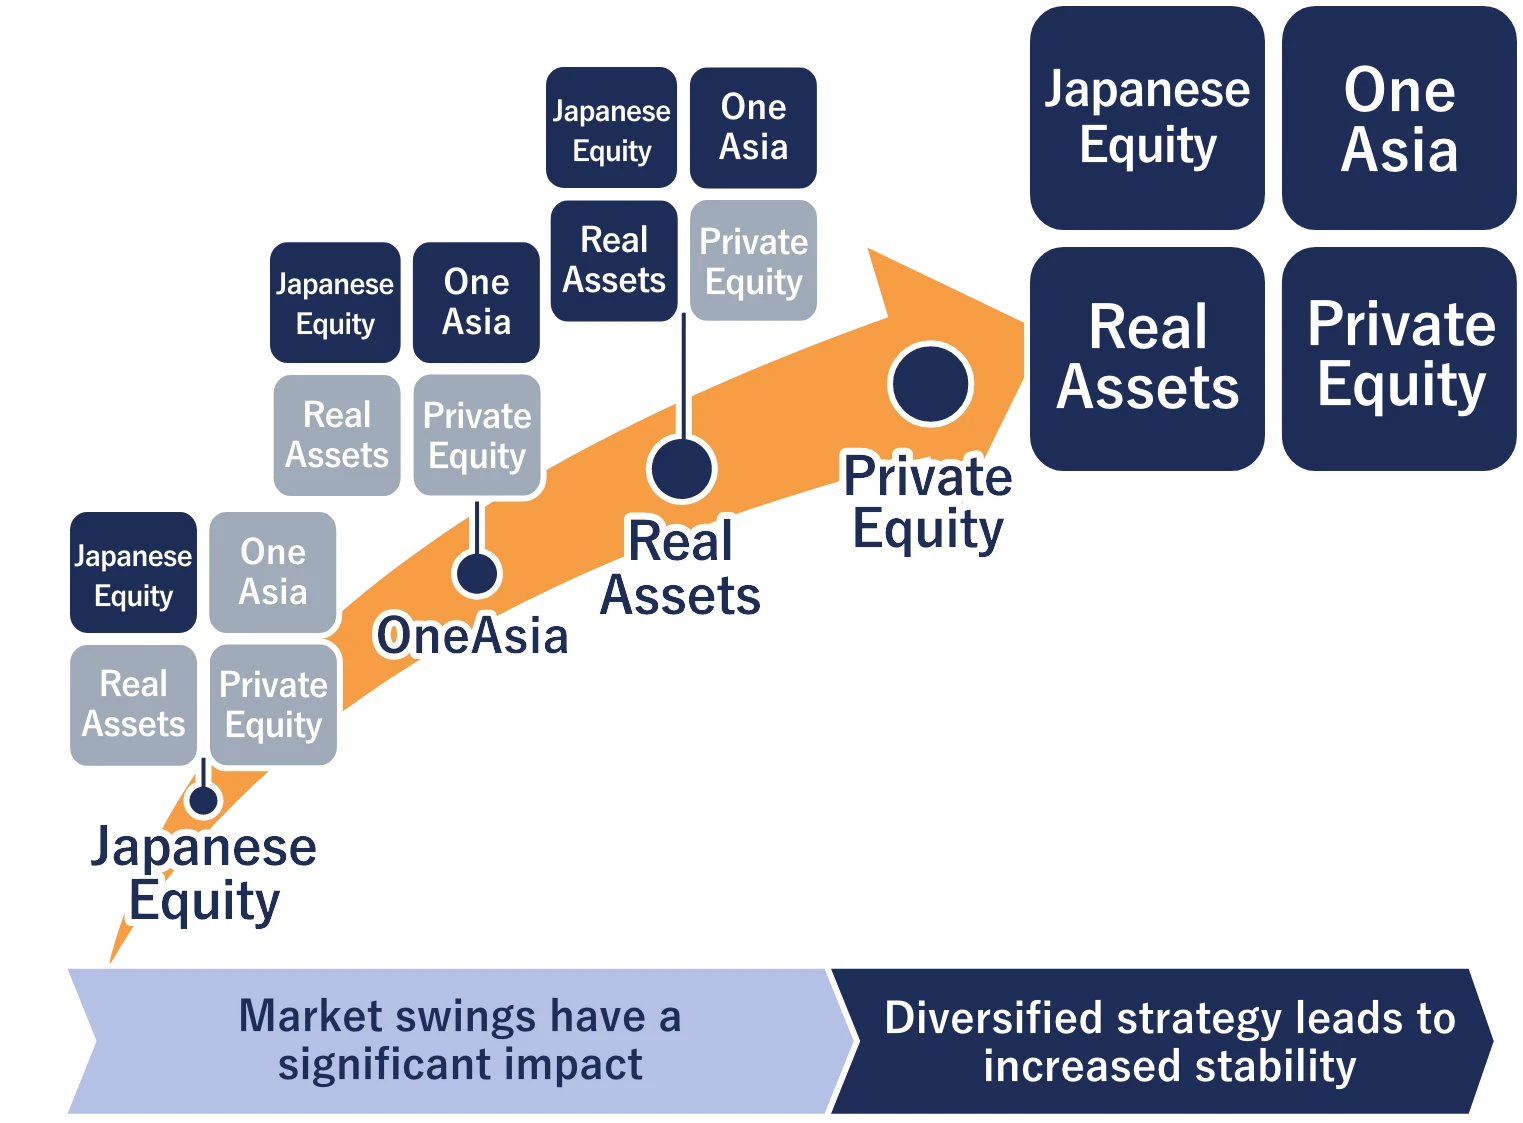 Japanese Equity, OneAsia, Real Assets, Private Equity